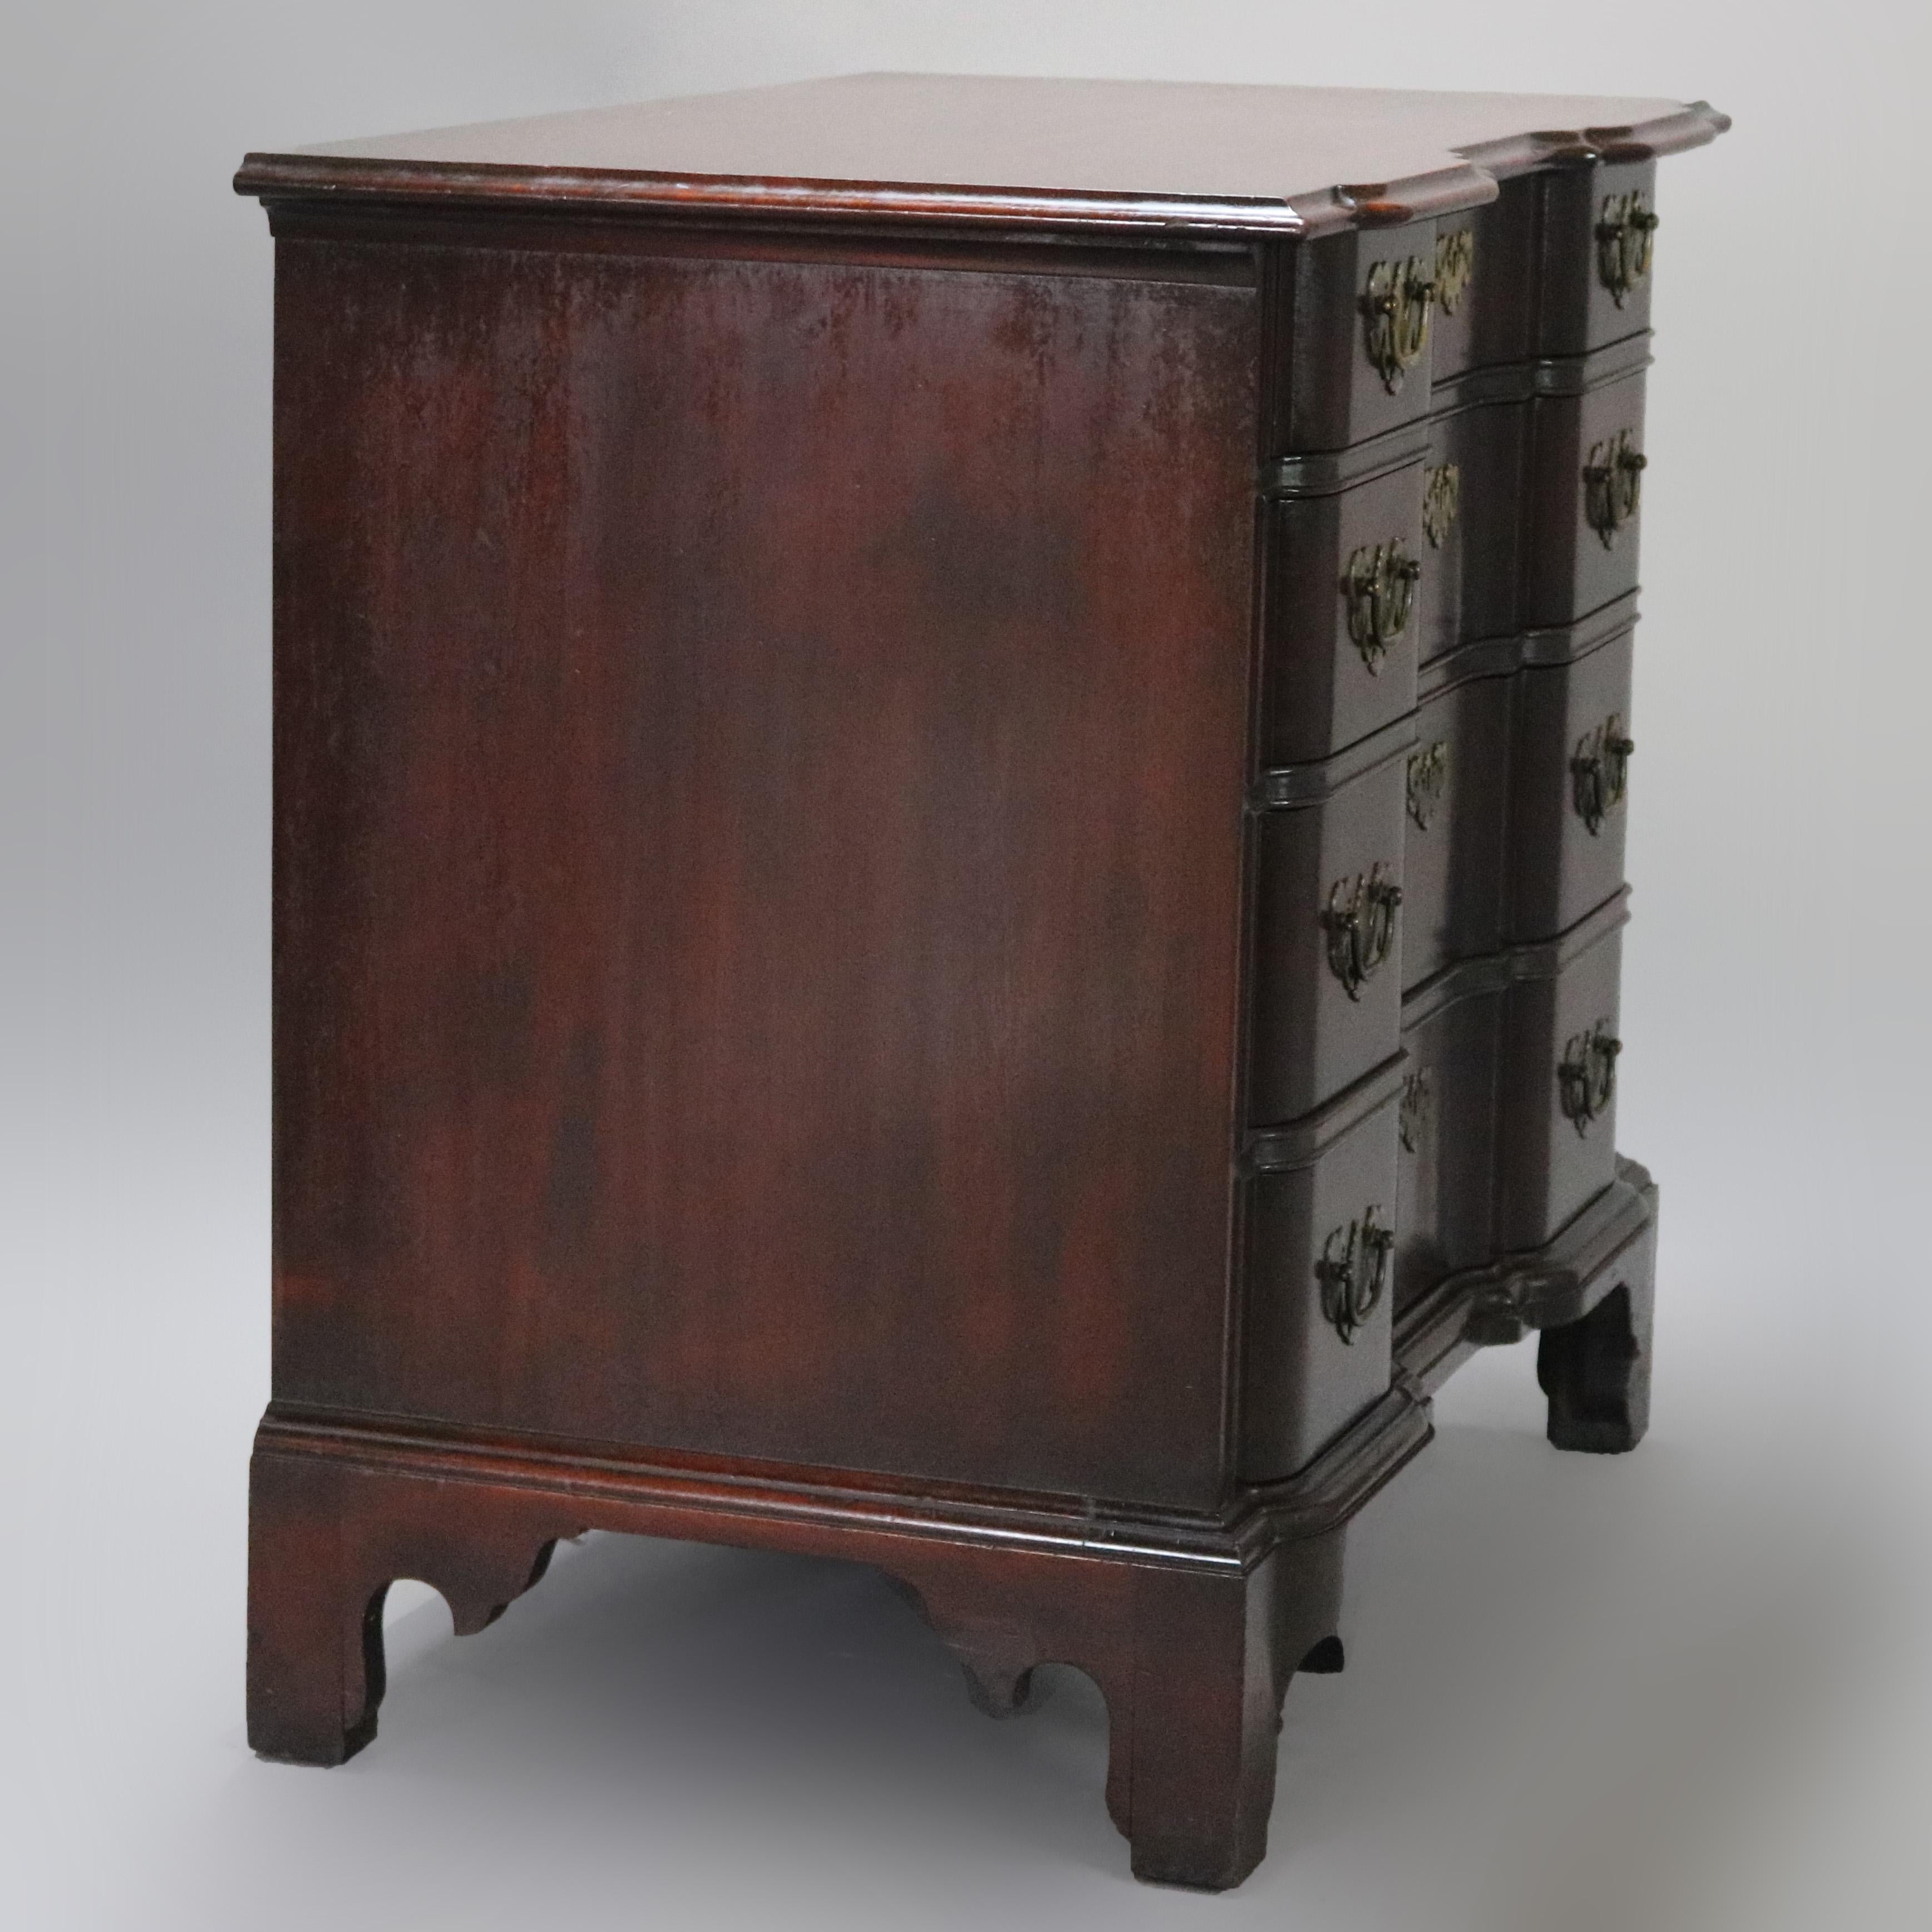 A vintage Chippendale Baker style block front butler's chest of drawers overs mahogany construction with four graduated doors, bat wing brass hardware and raised on bracket feet, 20th century

Measures: 31.25